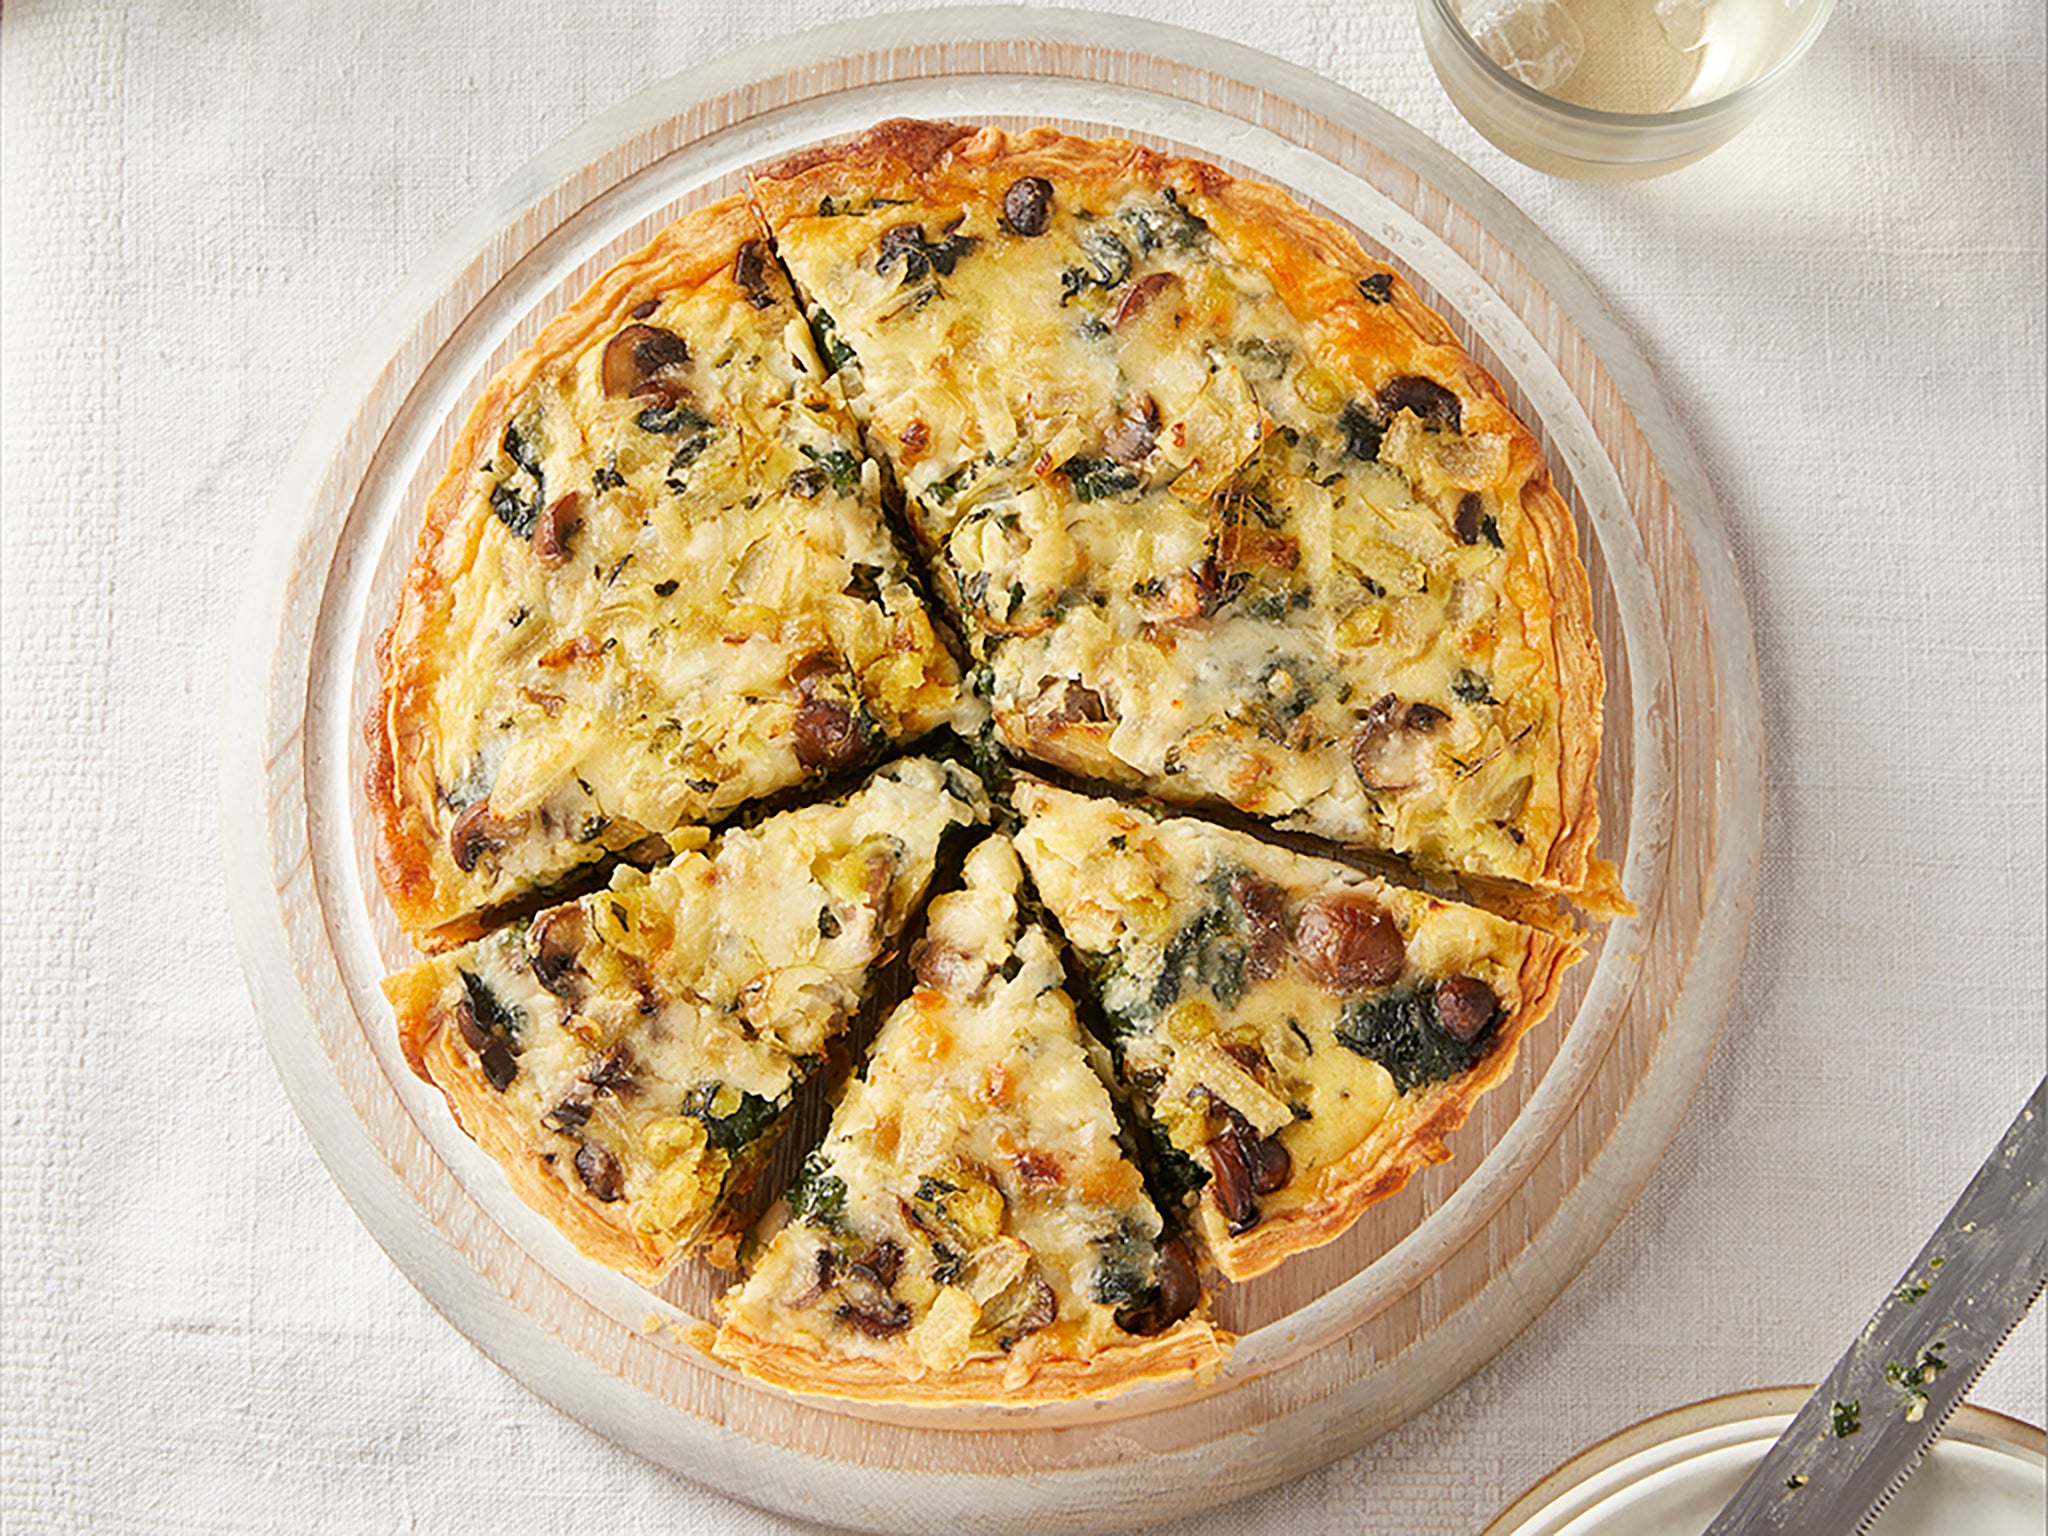 Gruyère is the perfect cheese for quiche